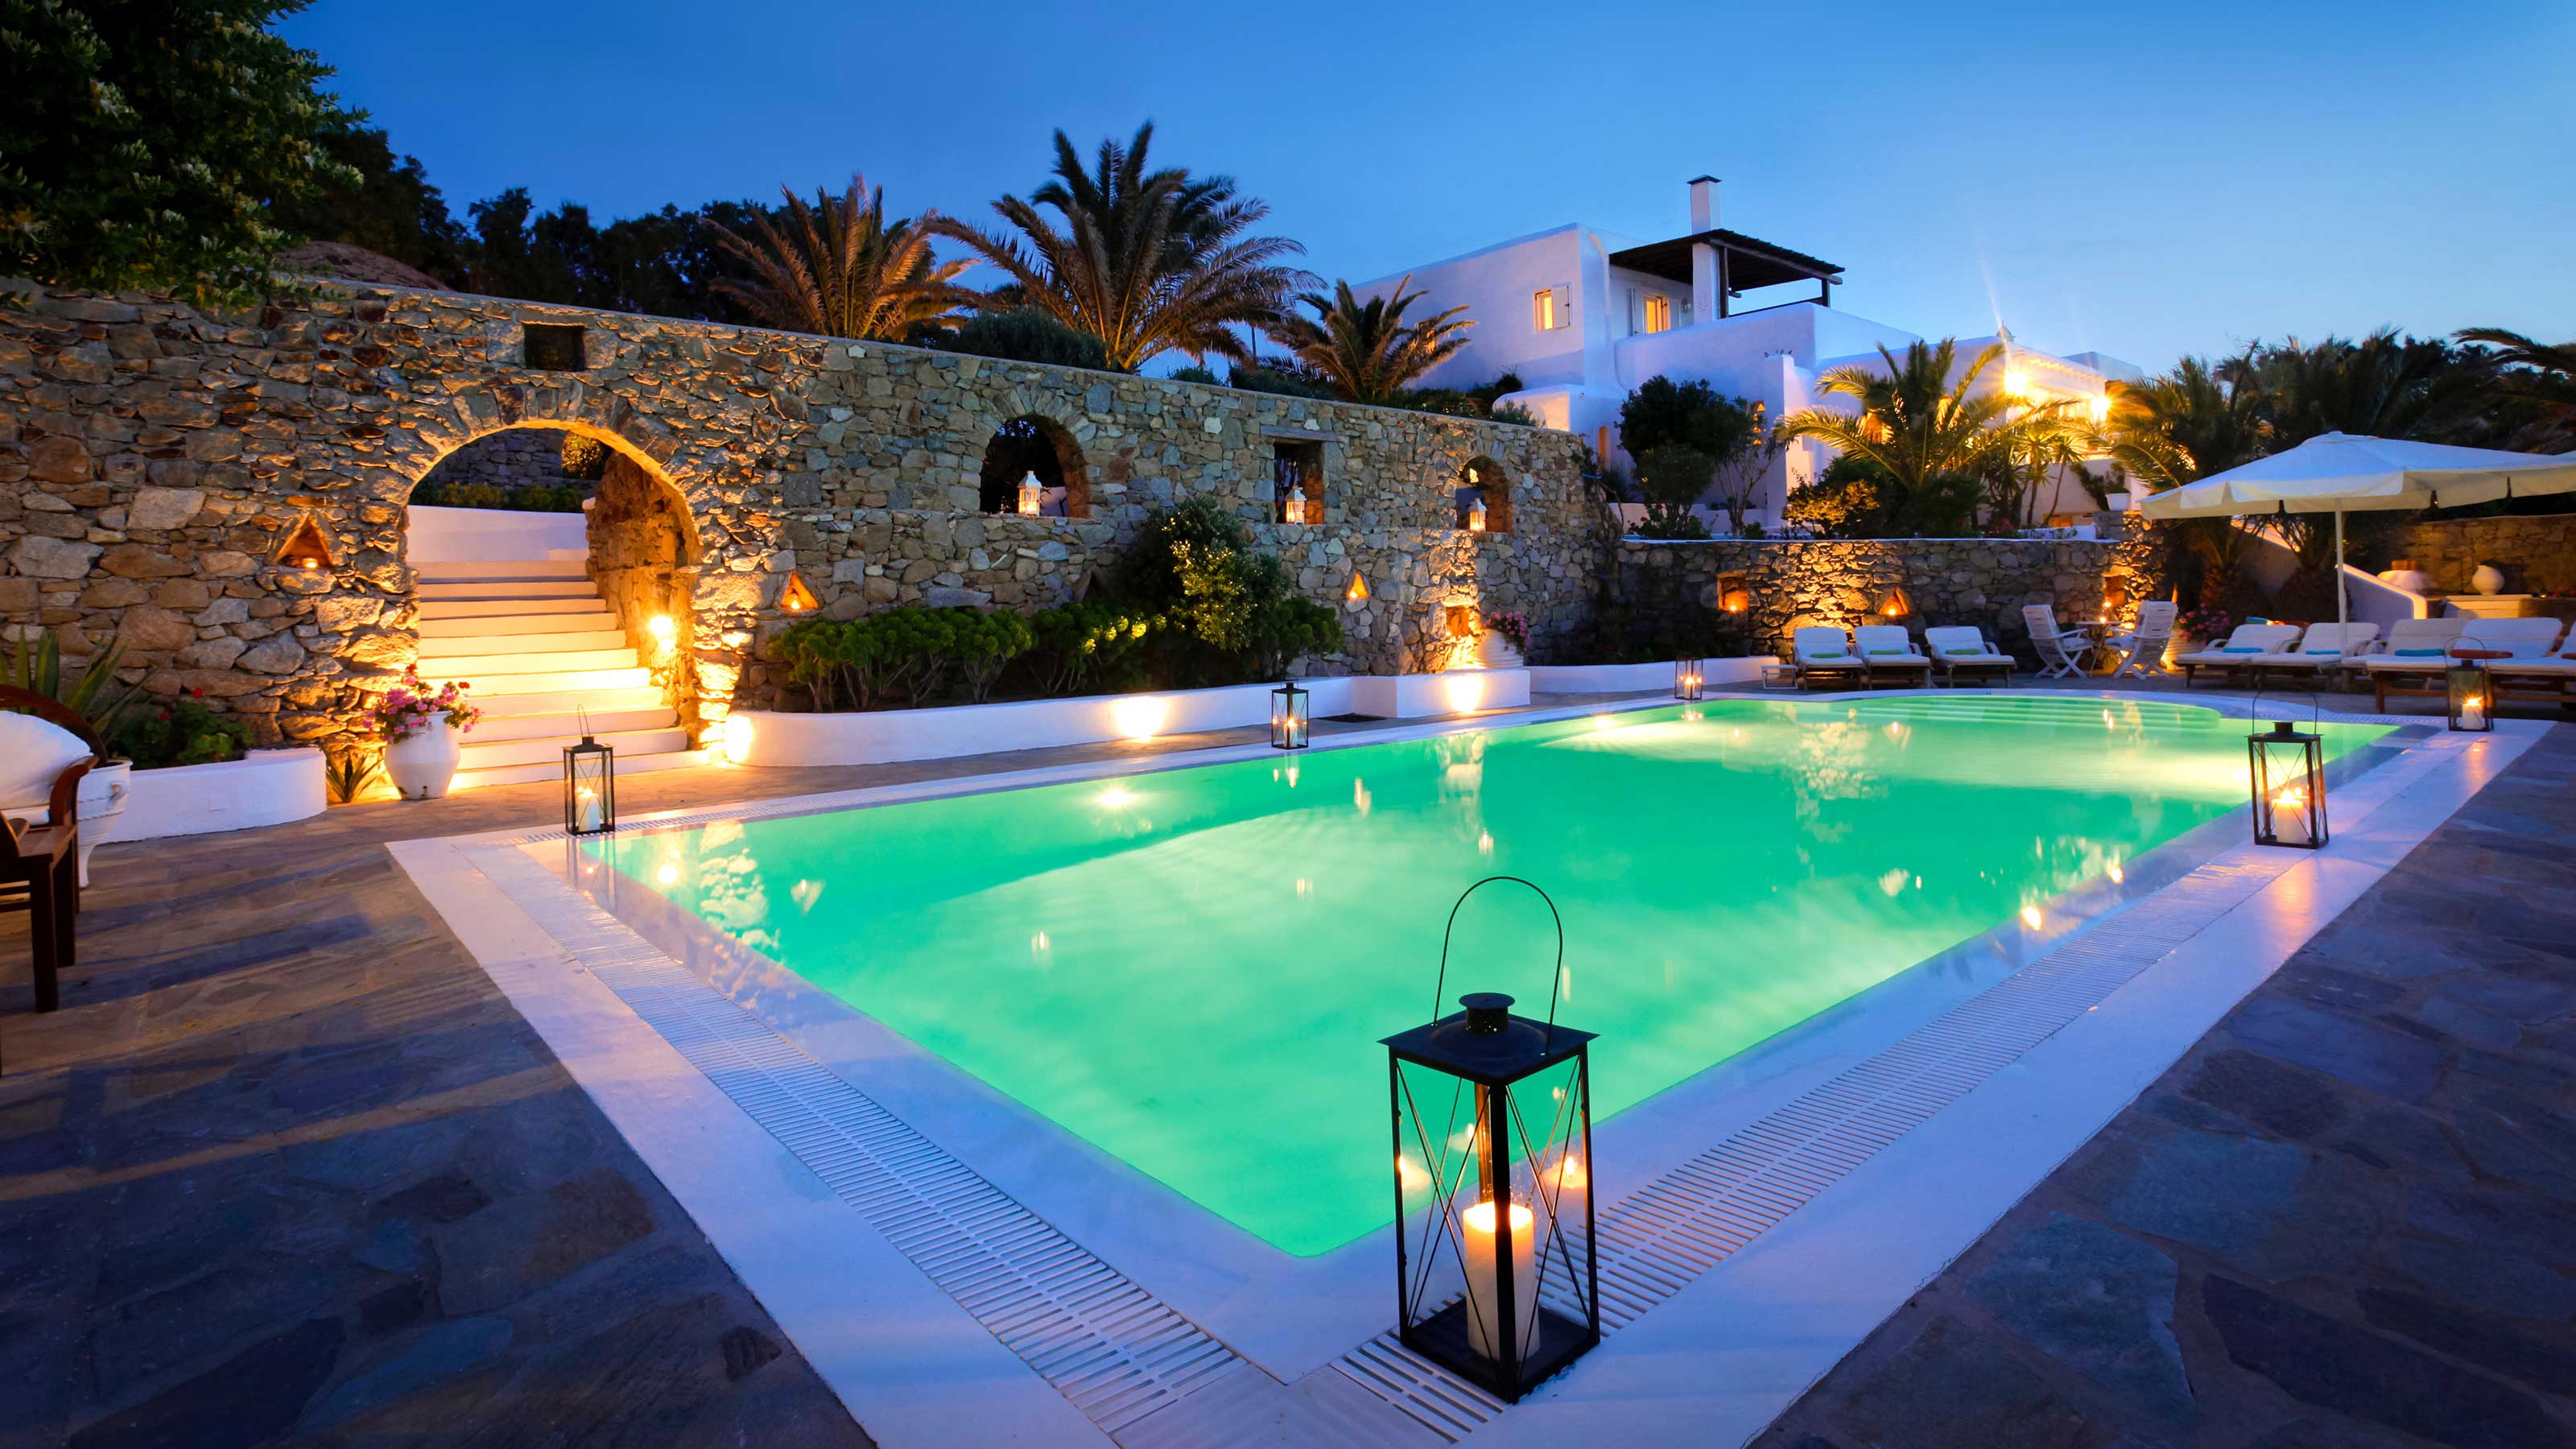 Swimming Pool Lights Guide - Light It Up With Pool Lights